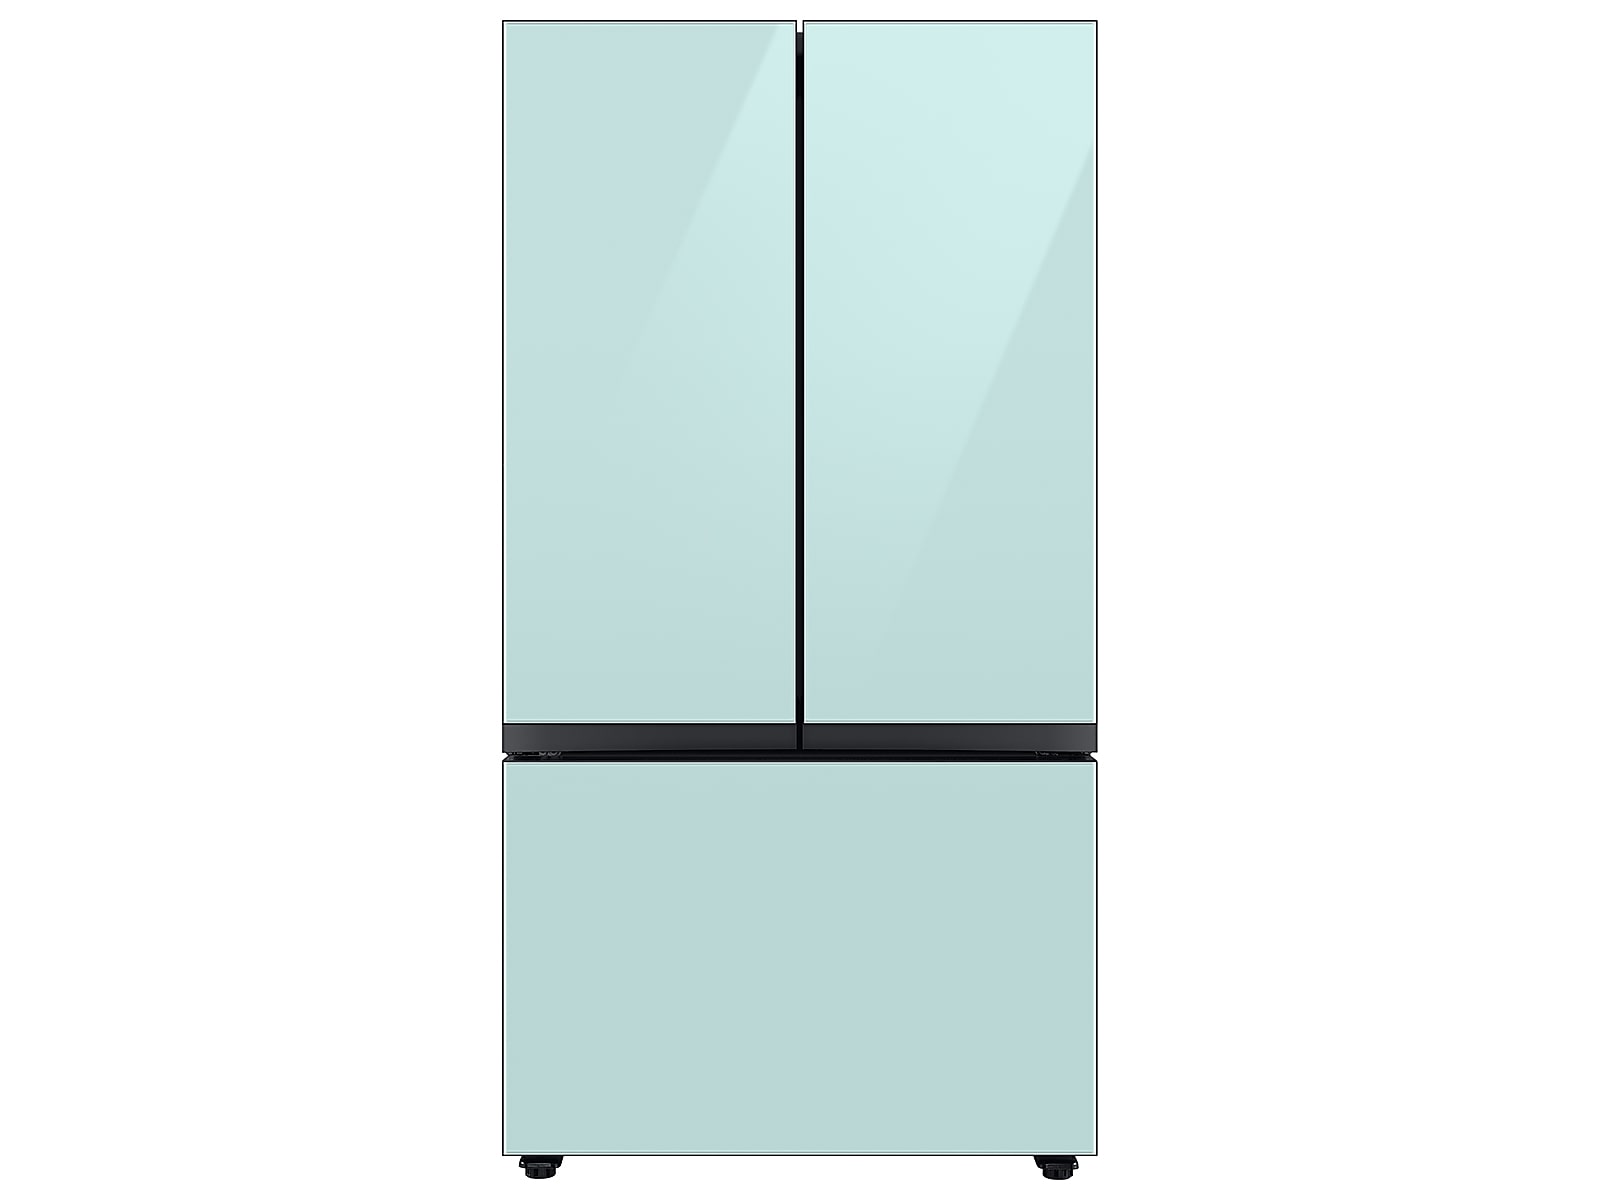 Samsung Bespoke 3-Door French Door Refrigerator (30 cu. ft.) with AutoFill Water Pitcher in Morning in Blue Glass(BNDL-1650465585935)